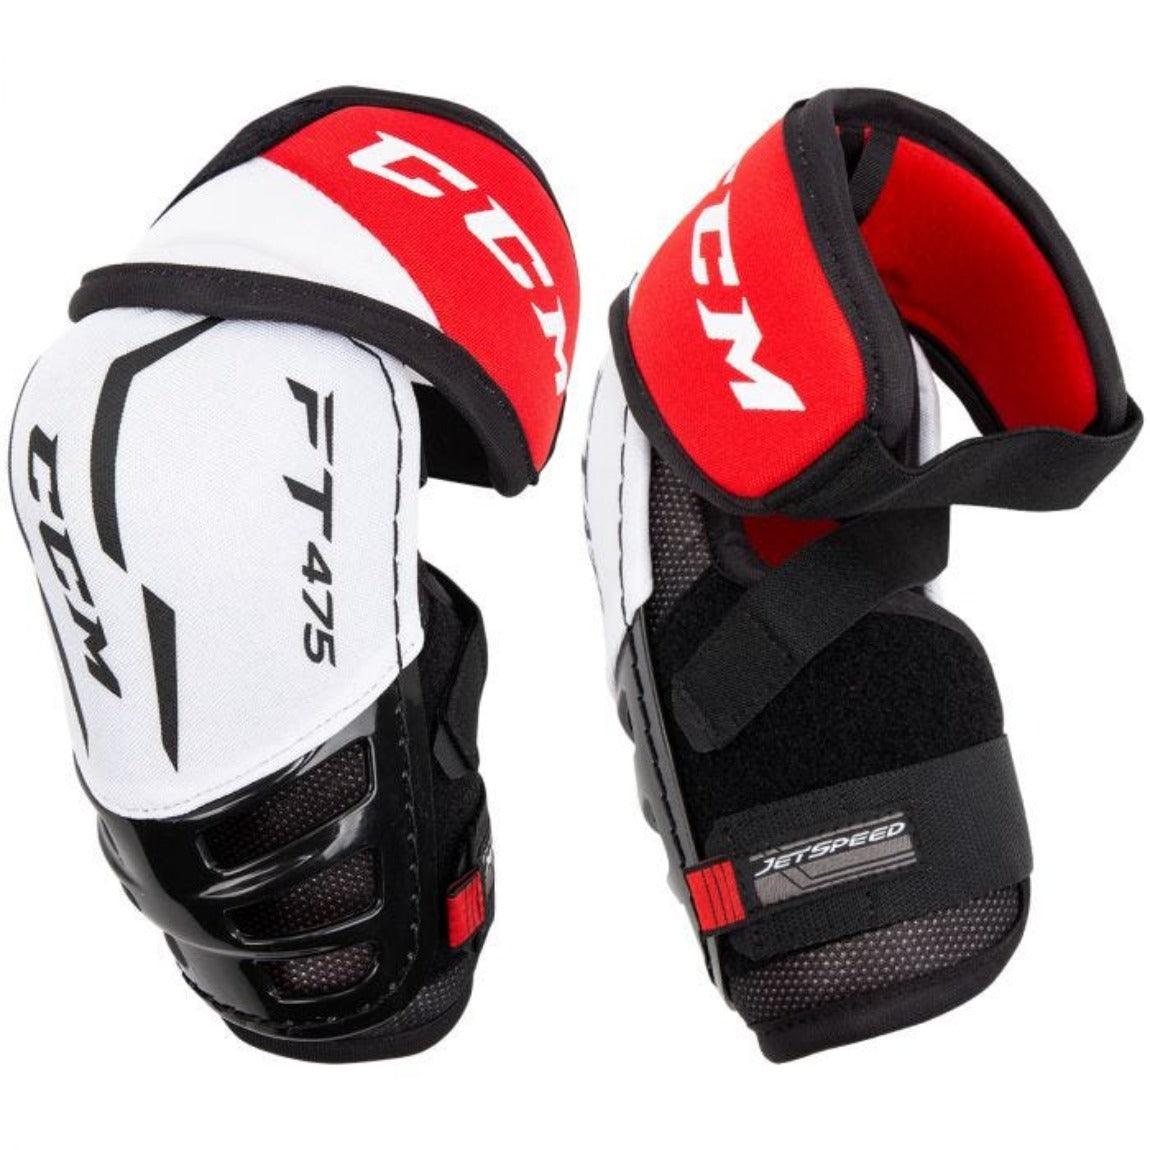 EP475 JetSpeed Elbow Pads - Junior - Sports Excellence